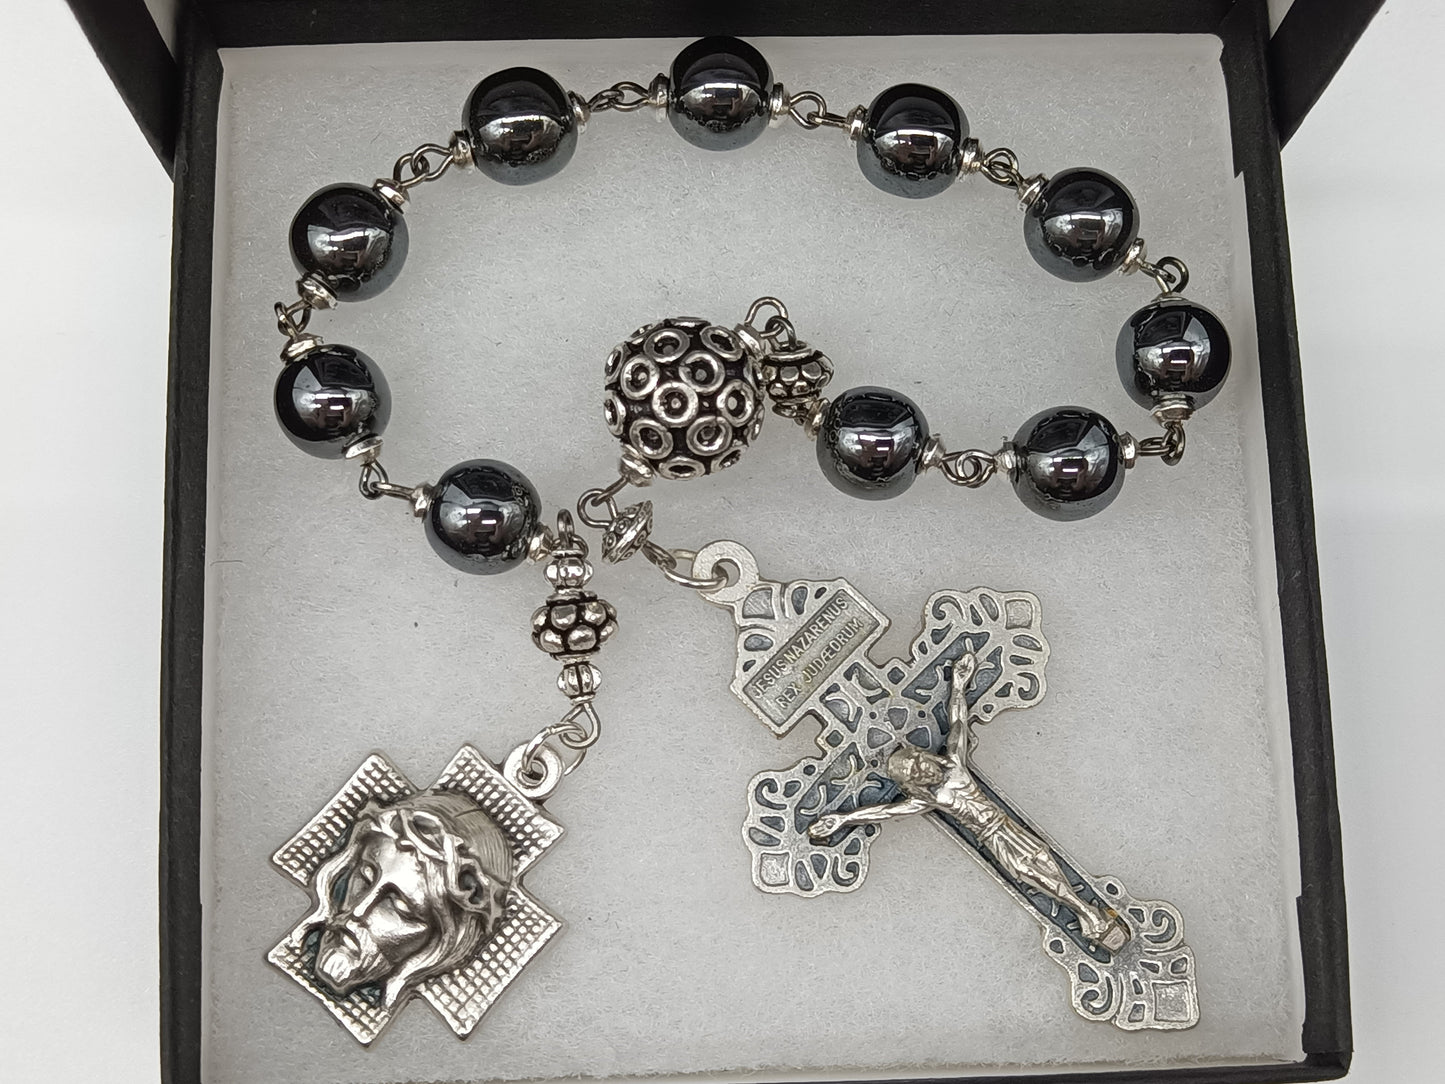 Holy Face Single decade Hematite gemstone Rosary beads, Men's Rosary, Crown of Thorns Rosary beads, Pardon Crucifix, Tenner Rosary beads.